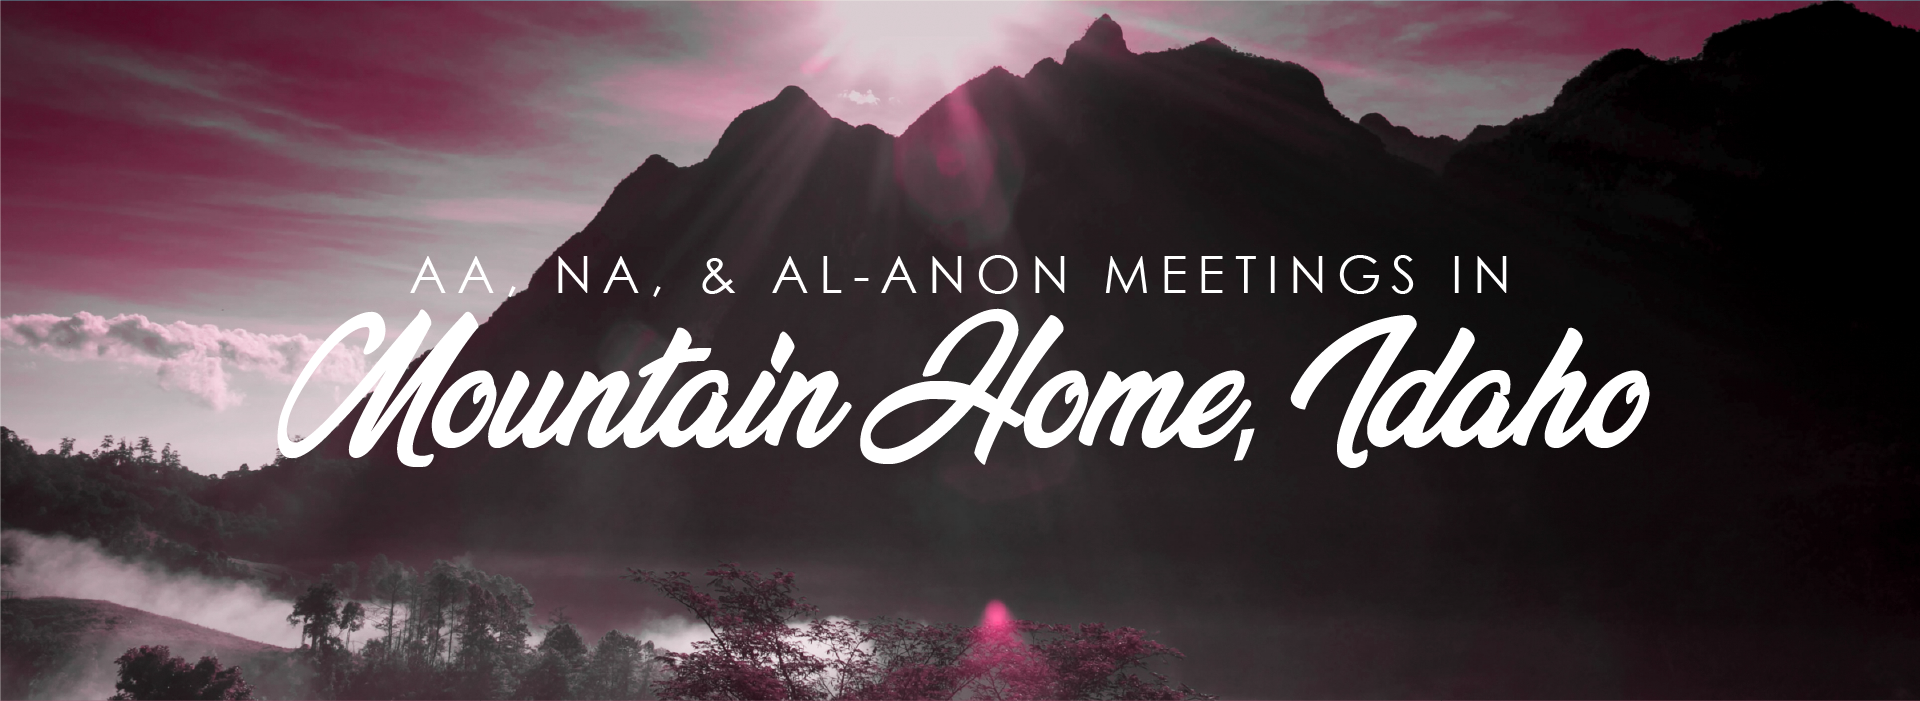 Alcoholics anonymous, narcotics anonymous, and al anon meetings in Mountain home Idaho